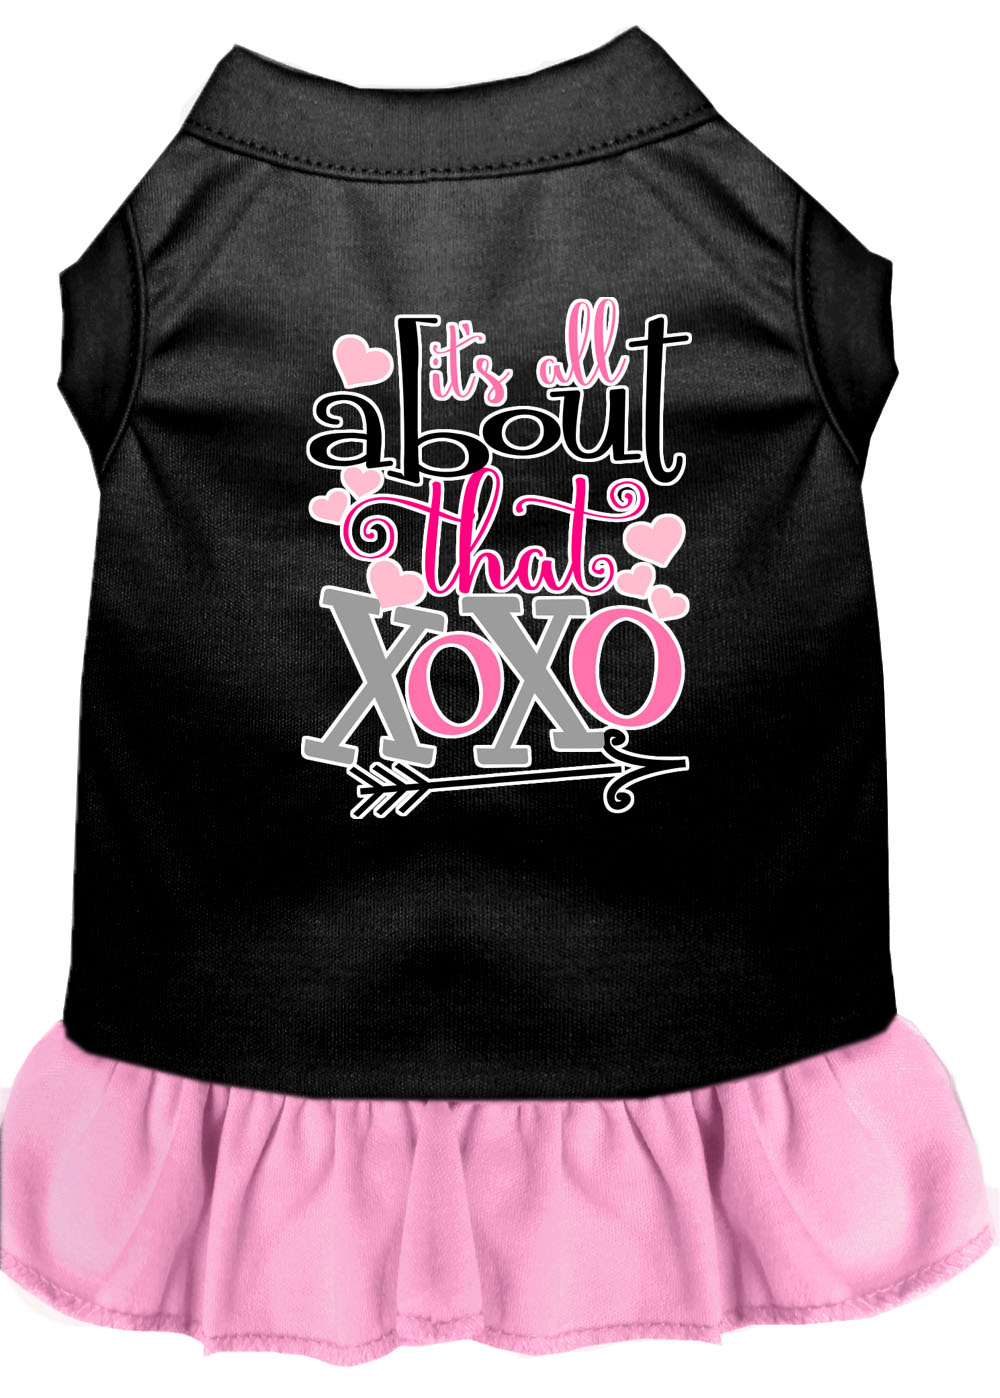 All about the XOXO Screen Print Dog Dress Black with Light Pink Lg